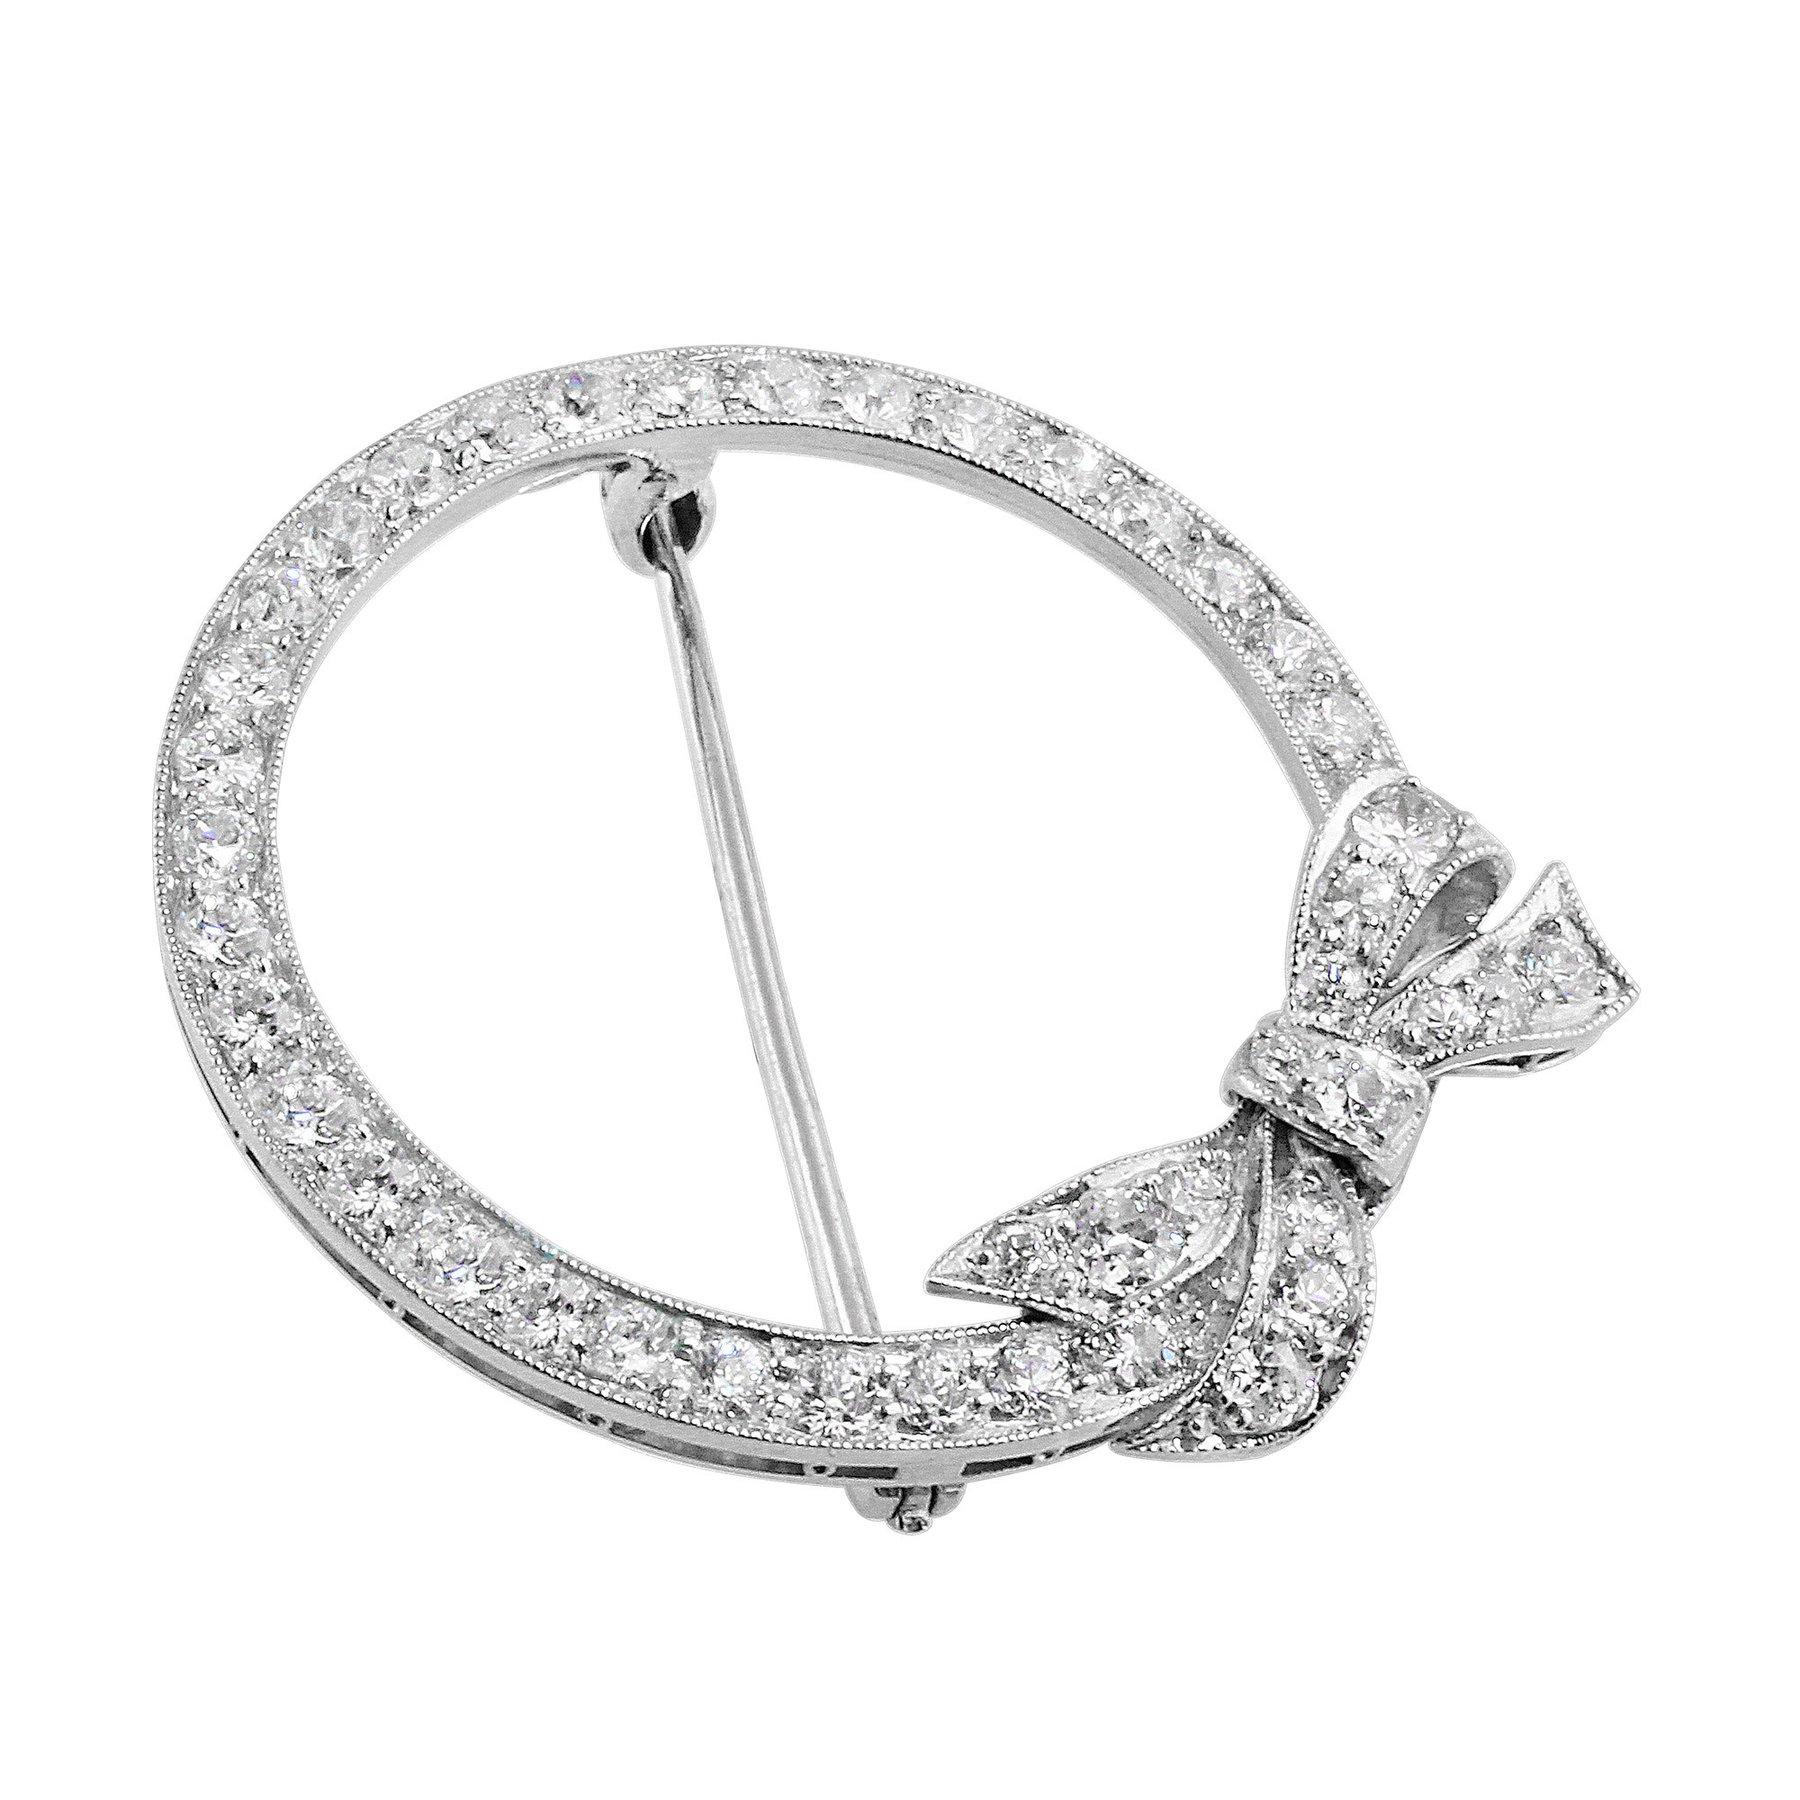 Estate Diamond Bow Round Brooch. Platinum round brooch with a bow, set with 44 diamonds weighing approximately 1.76cttw.